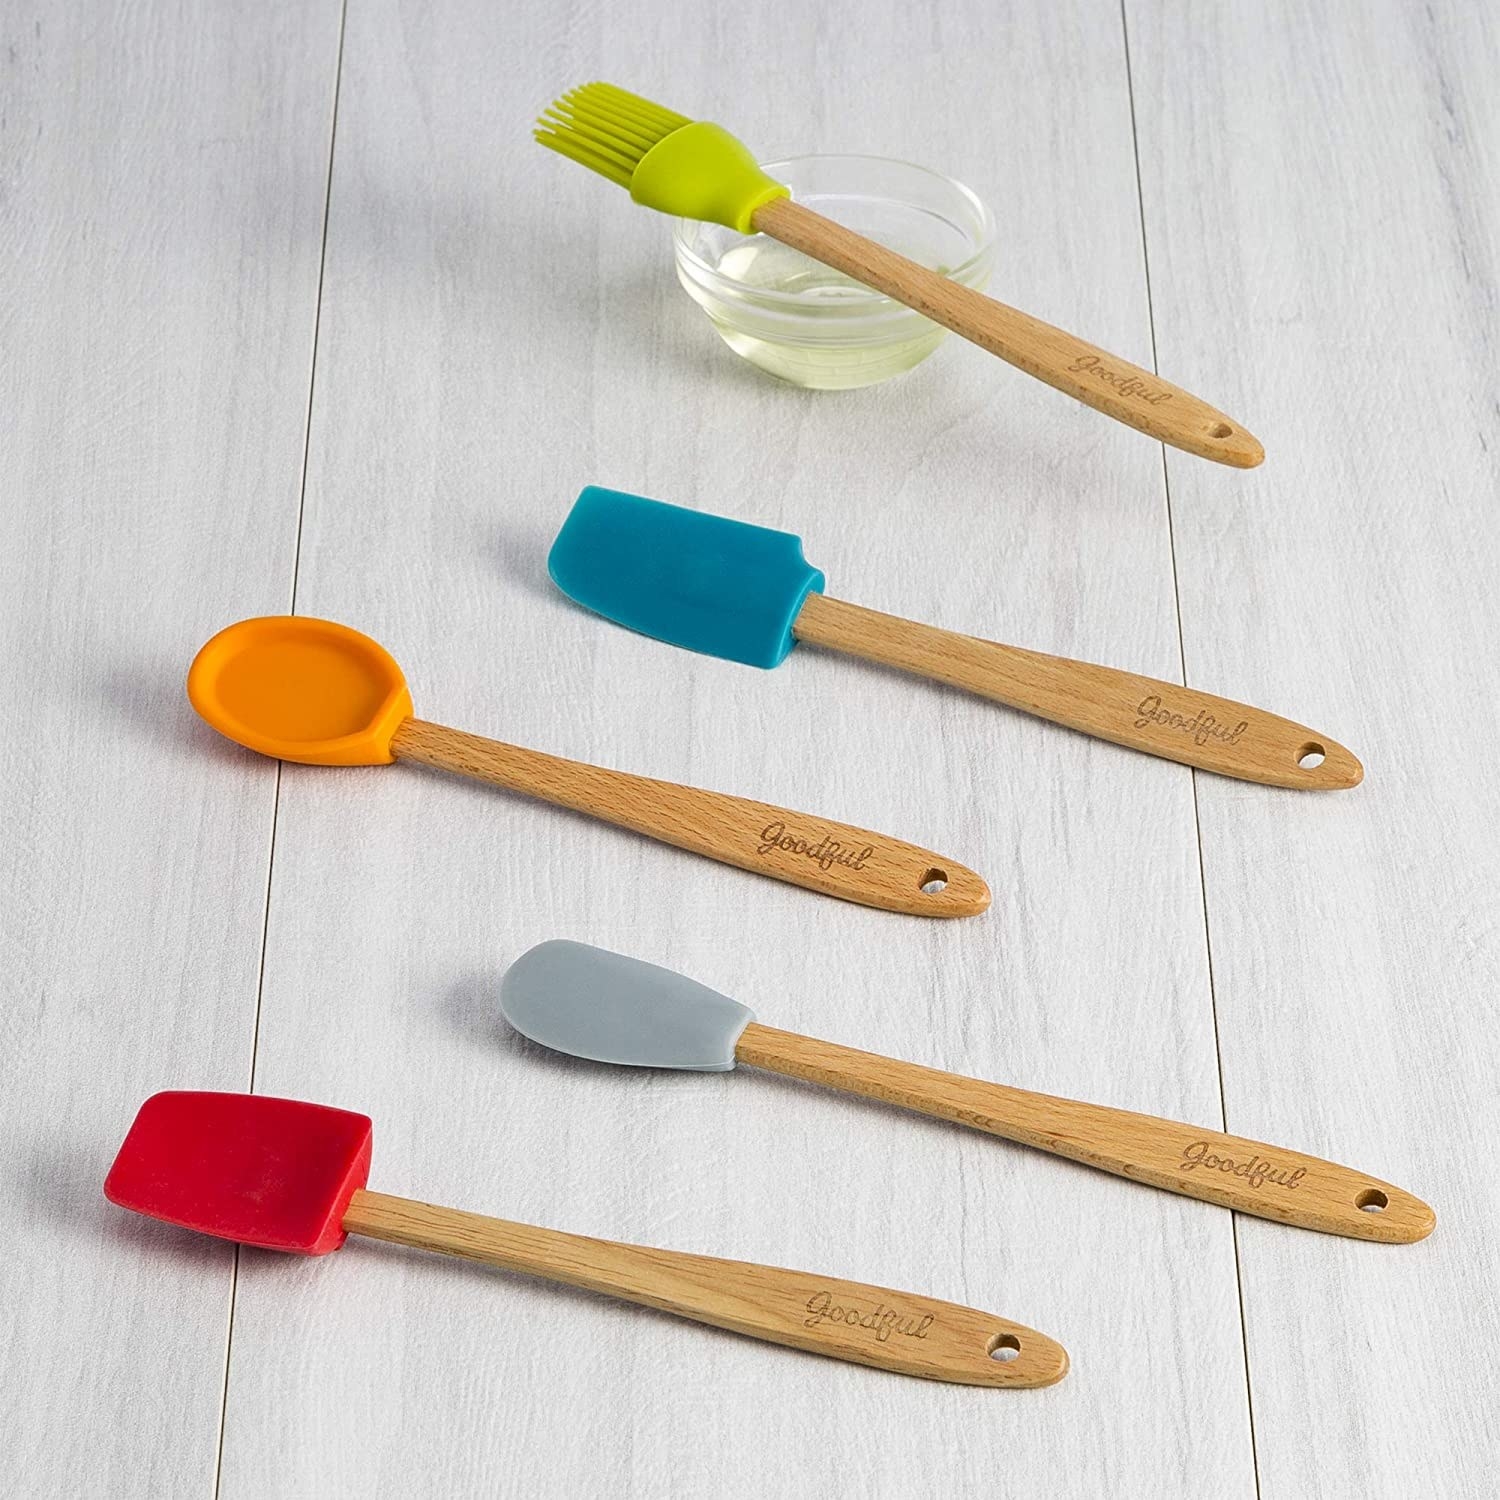 The red, gray, orange, blue, and green utensils